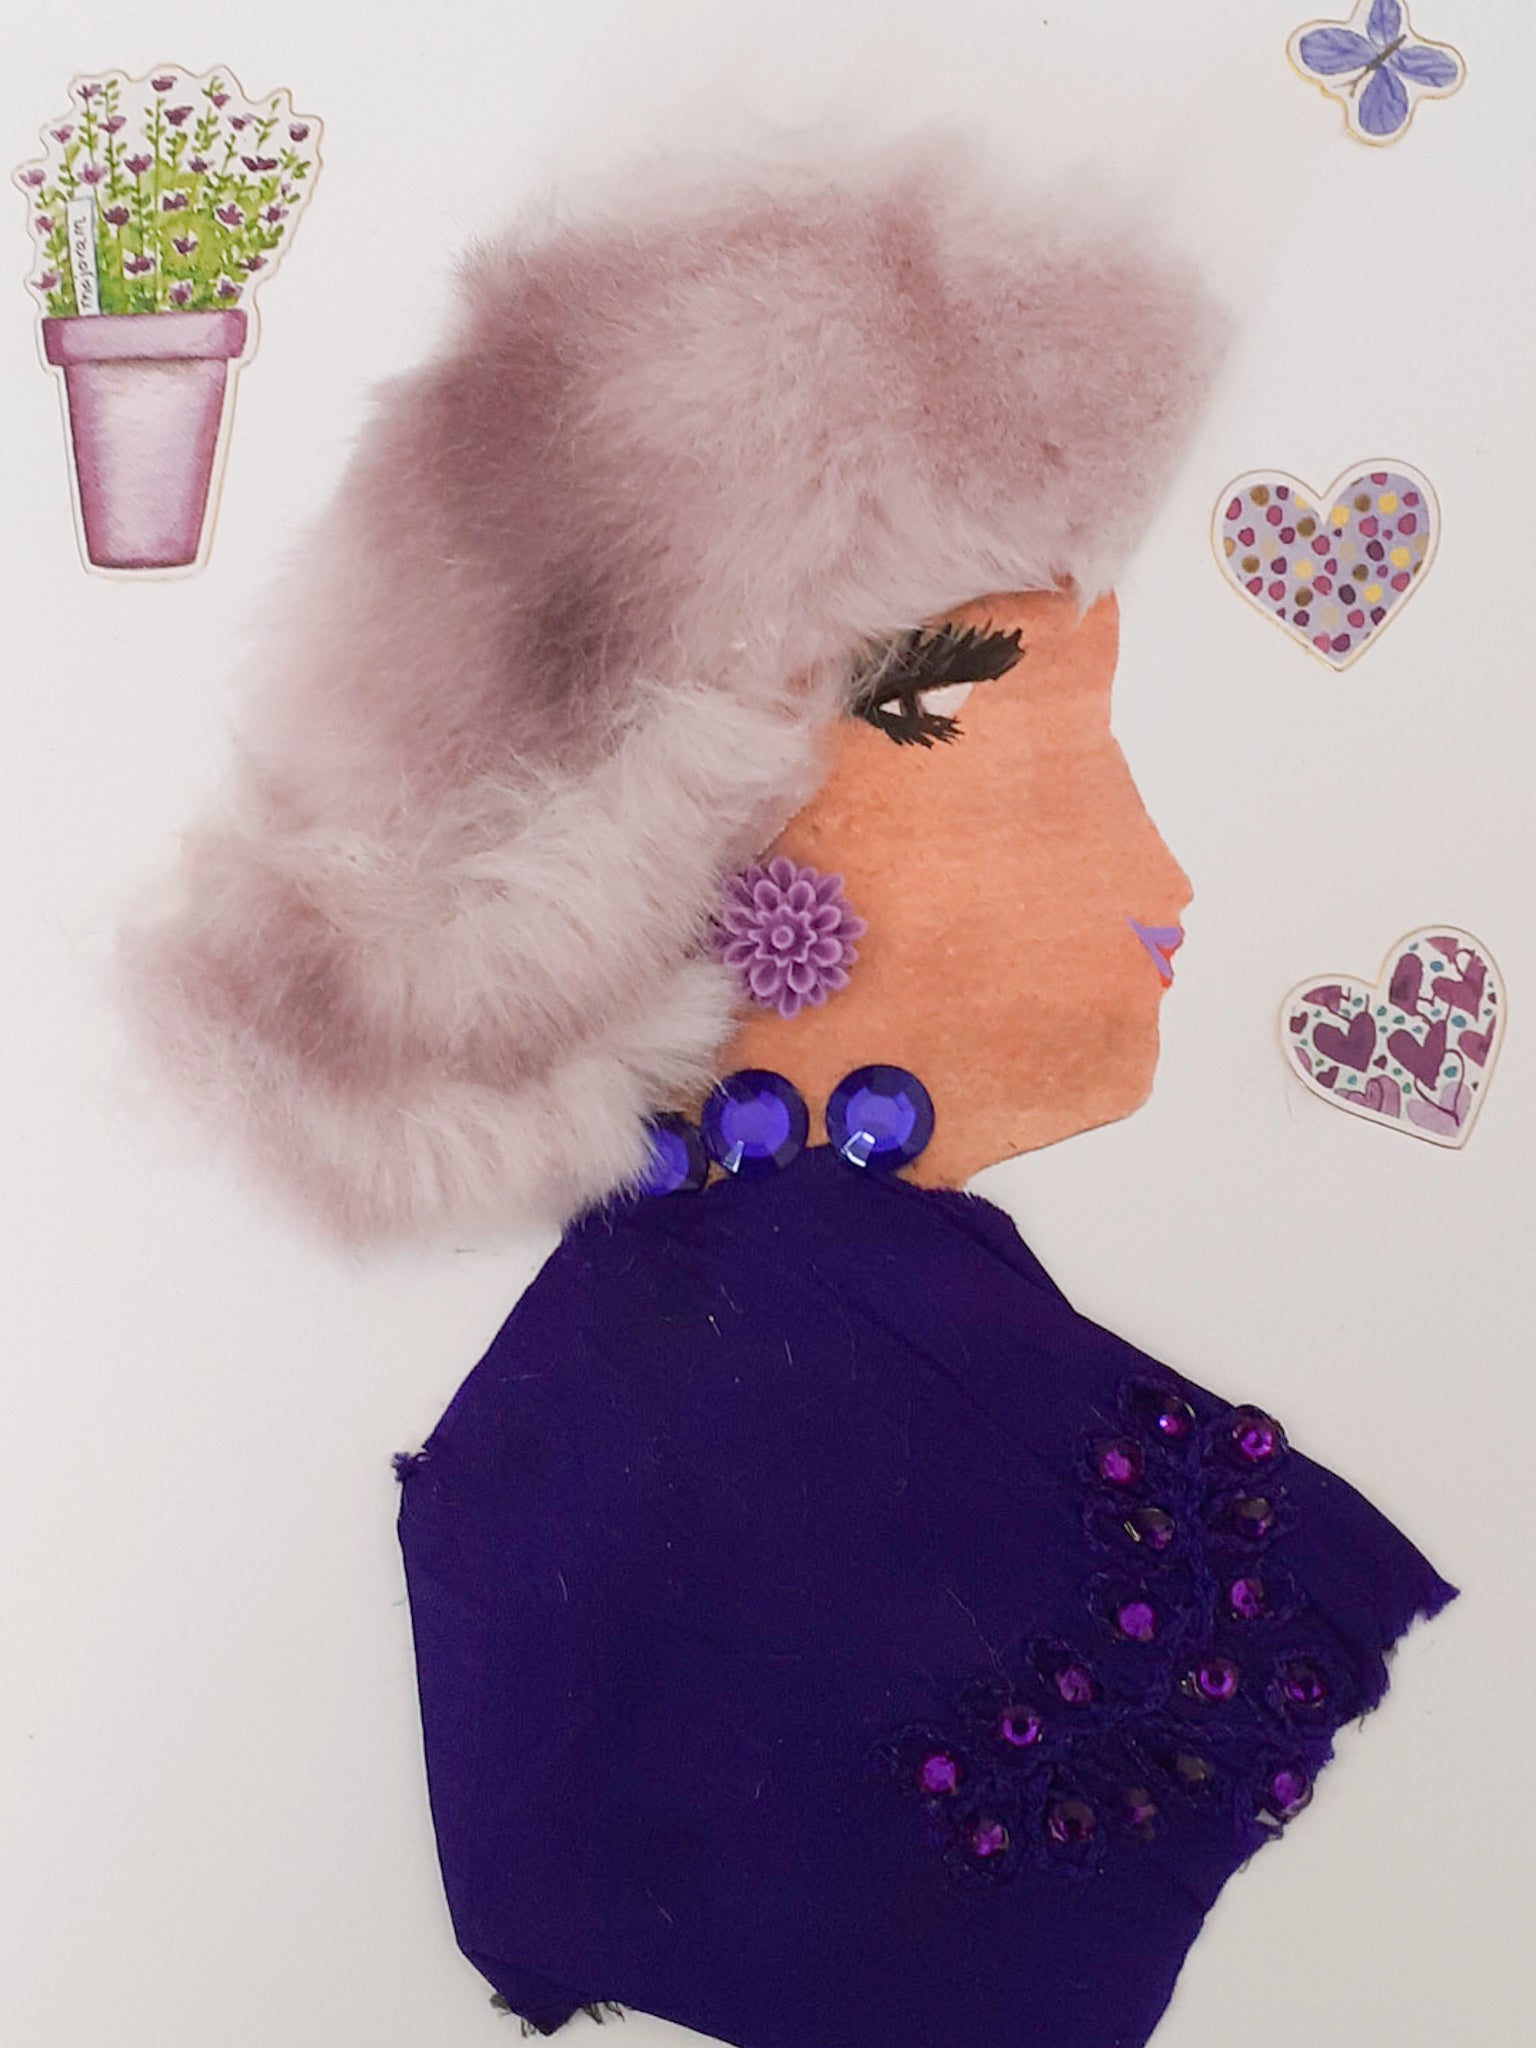 This card is called Camila. She wears a light purple fur headpiece, a dark purple blouse, and a purple gem necklace. TO her right there is a small butterfly sticker and two heart stickers. To her left, there is a sticker of a potted plant.